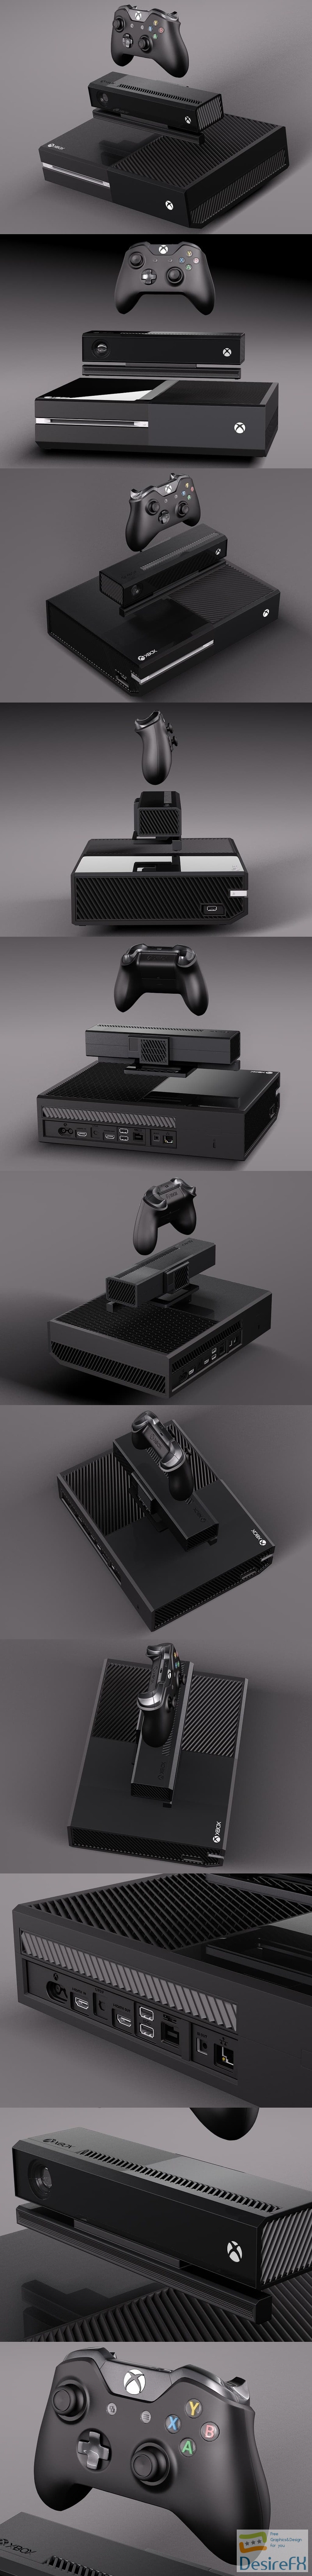 Xbox One with Kinect 3D Model